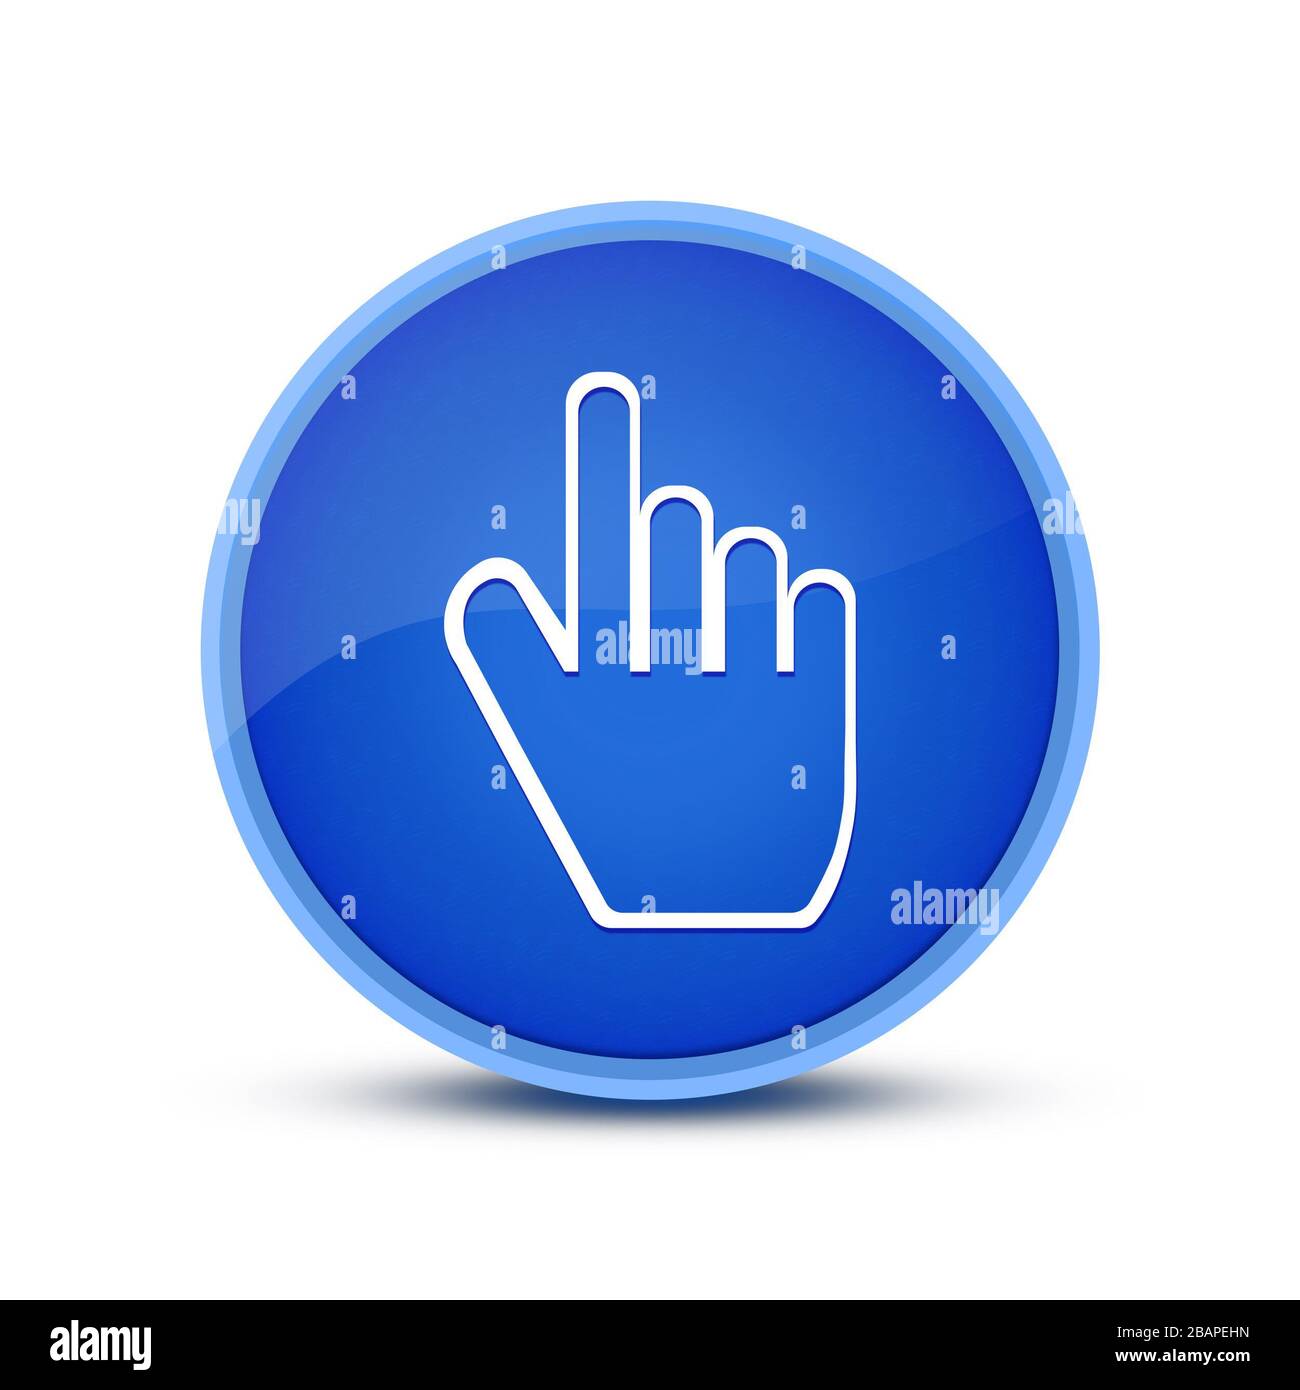 Hand icon isolated on blue round button abstract button abstract illustration Stock Photo